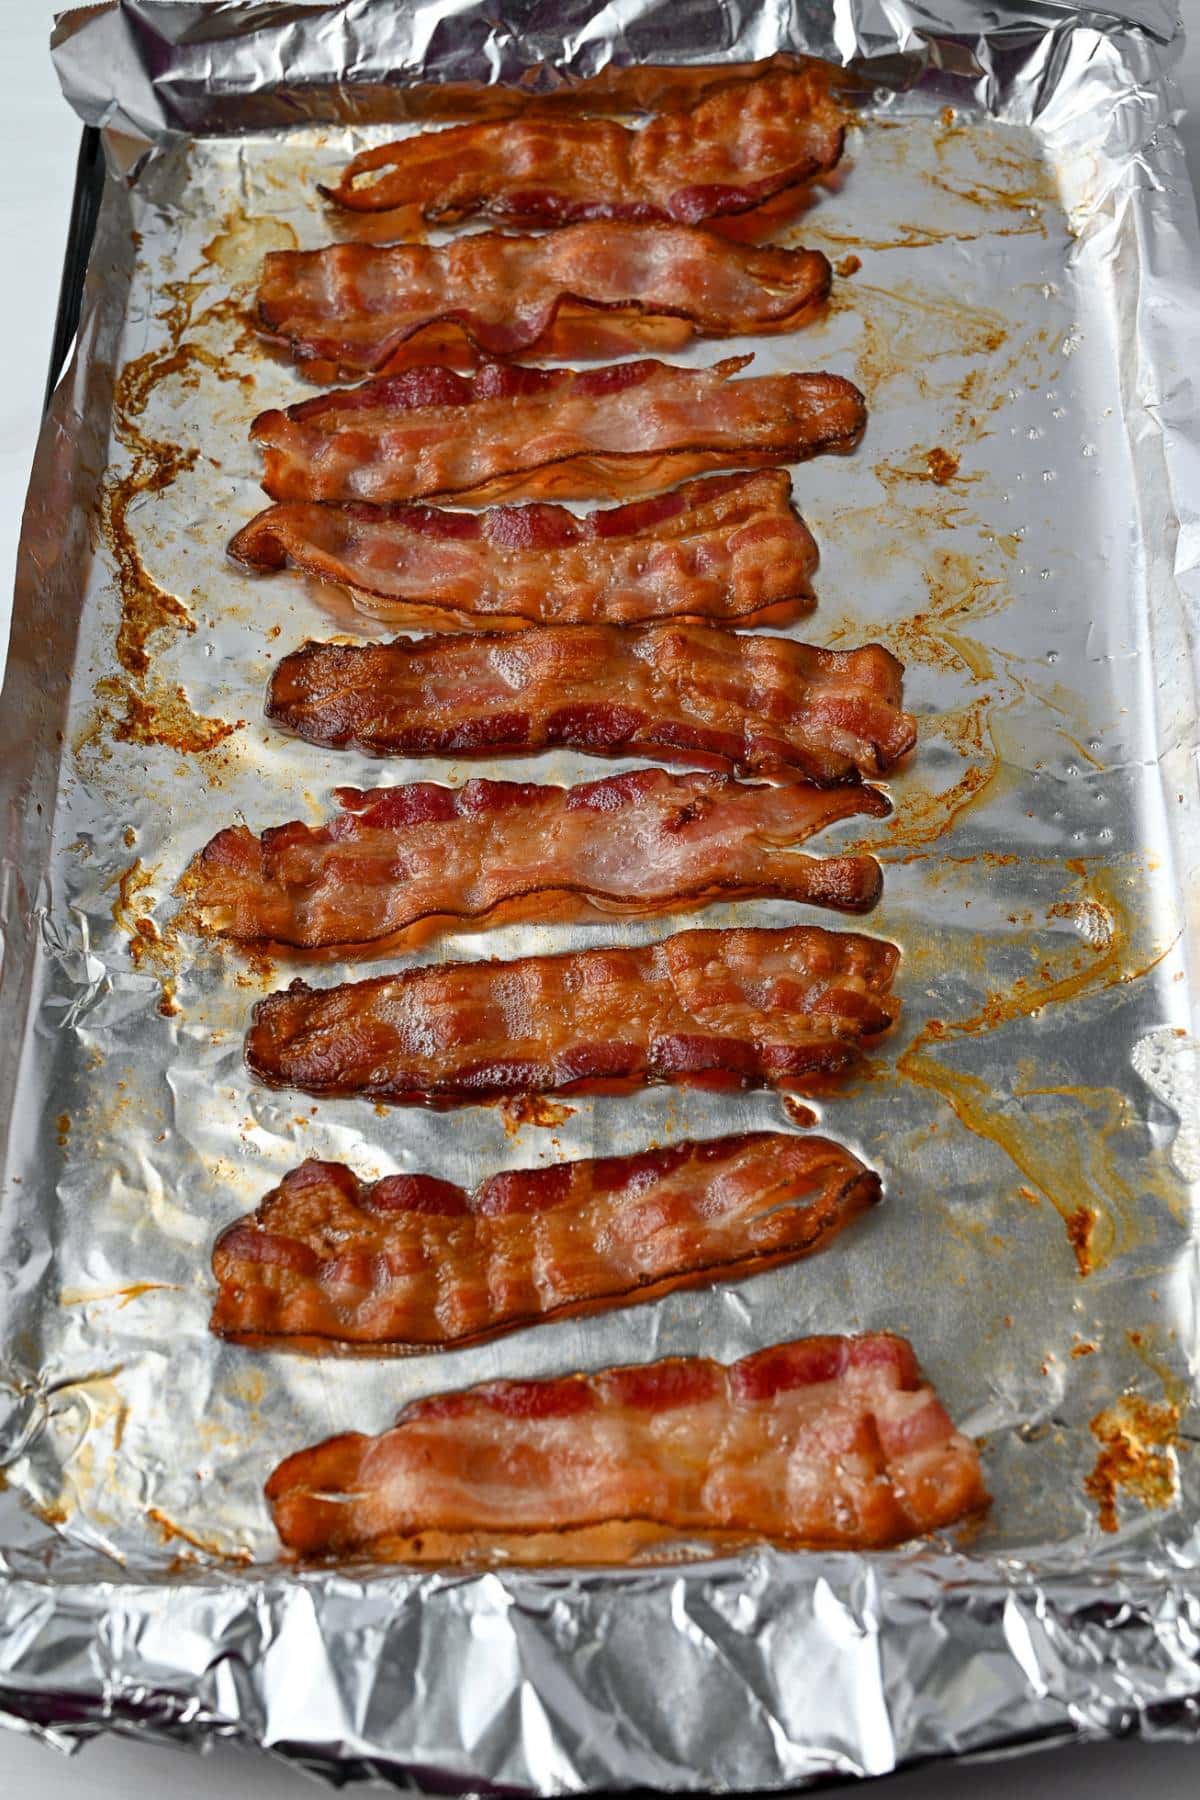 oven-cooked bacon on a foil lined baking sheet